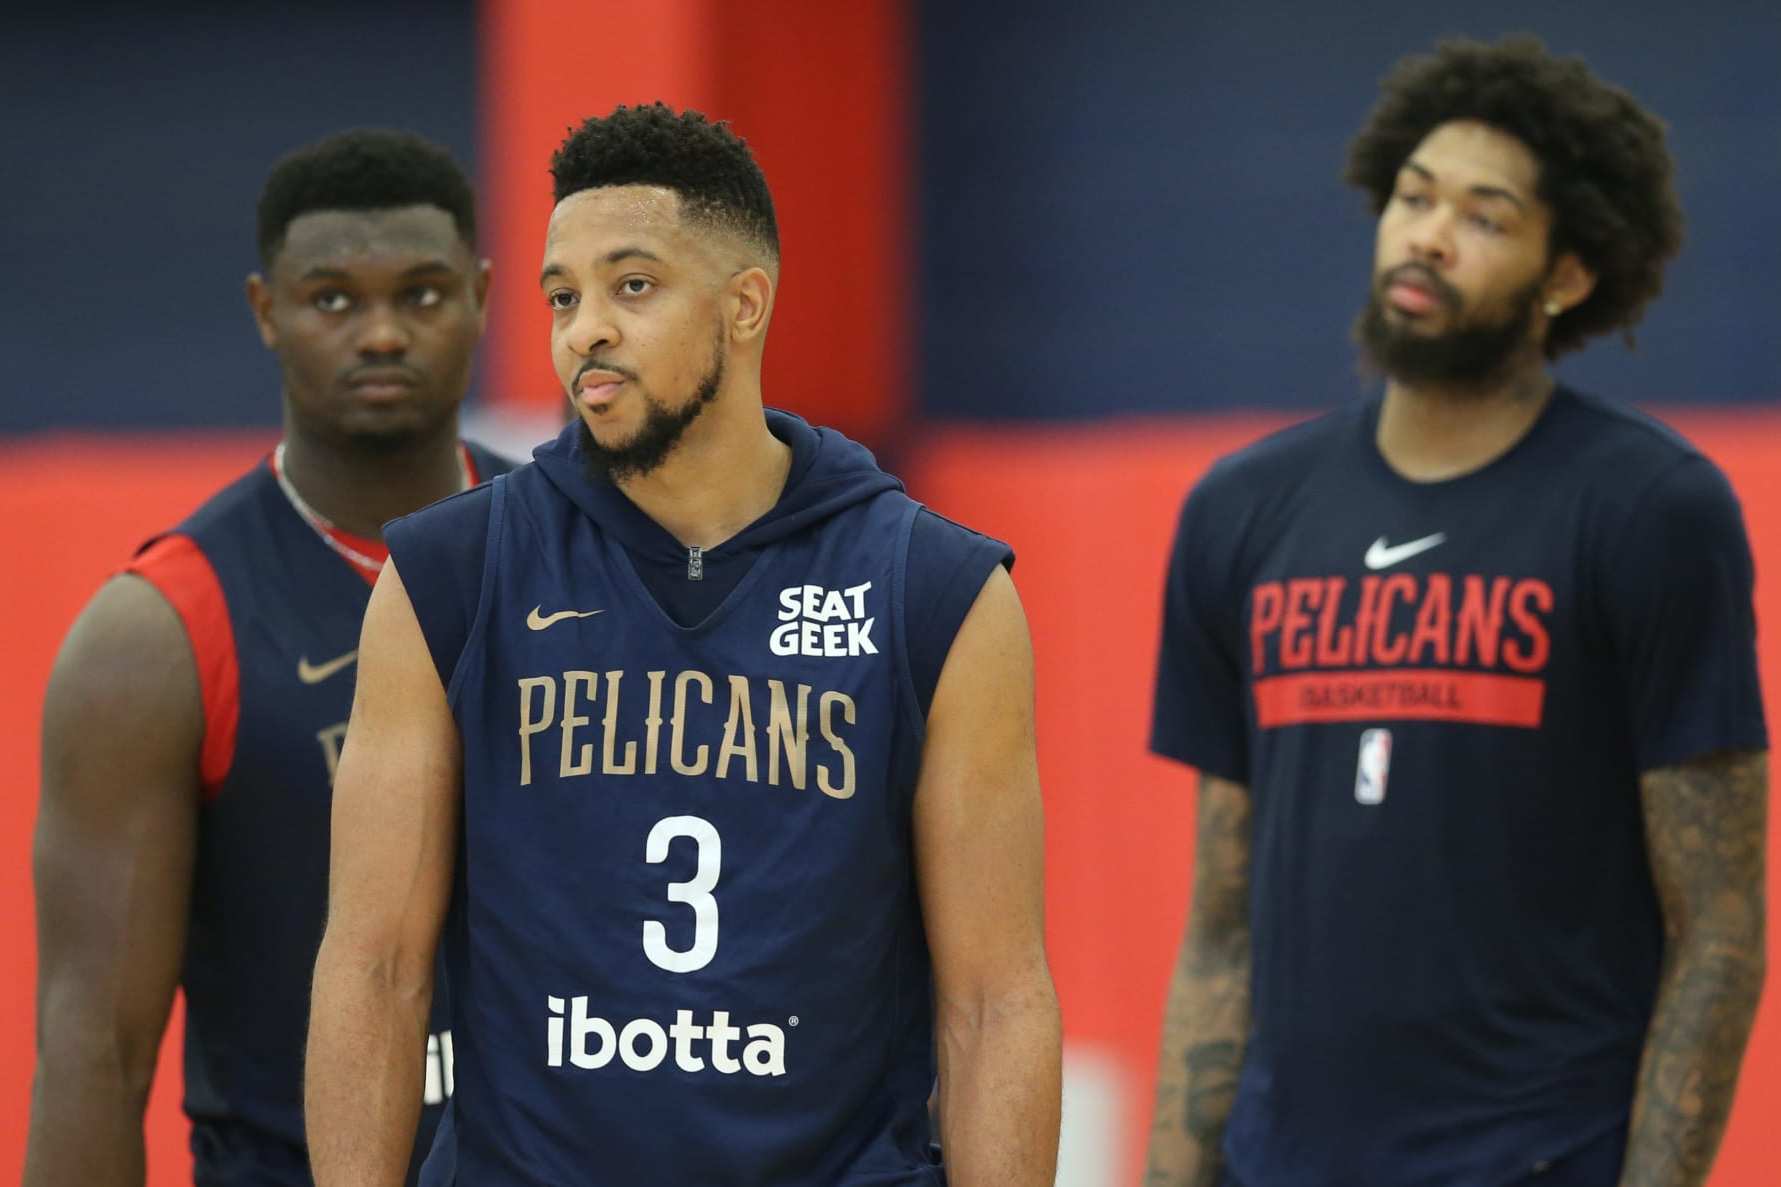 NBA's biggest overachievers: The 76ers, Pelicans and Hawks youth